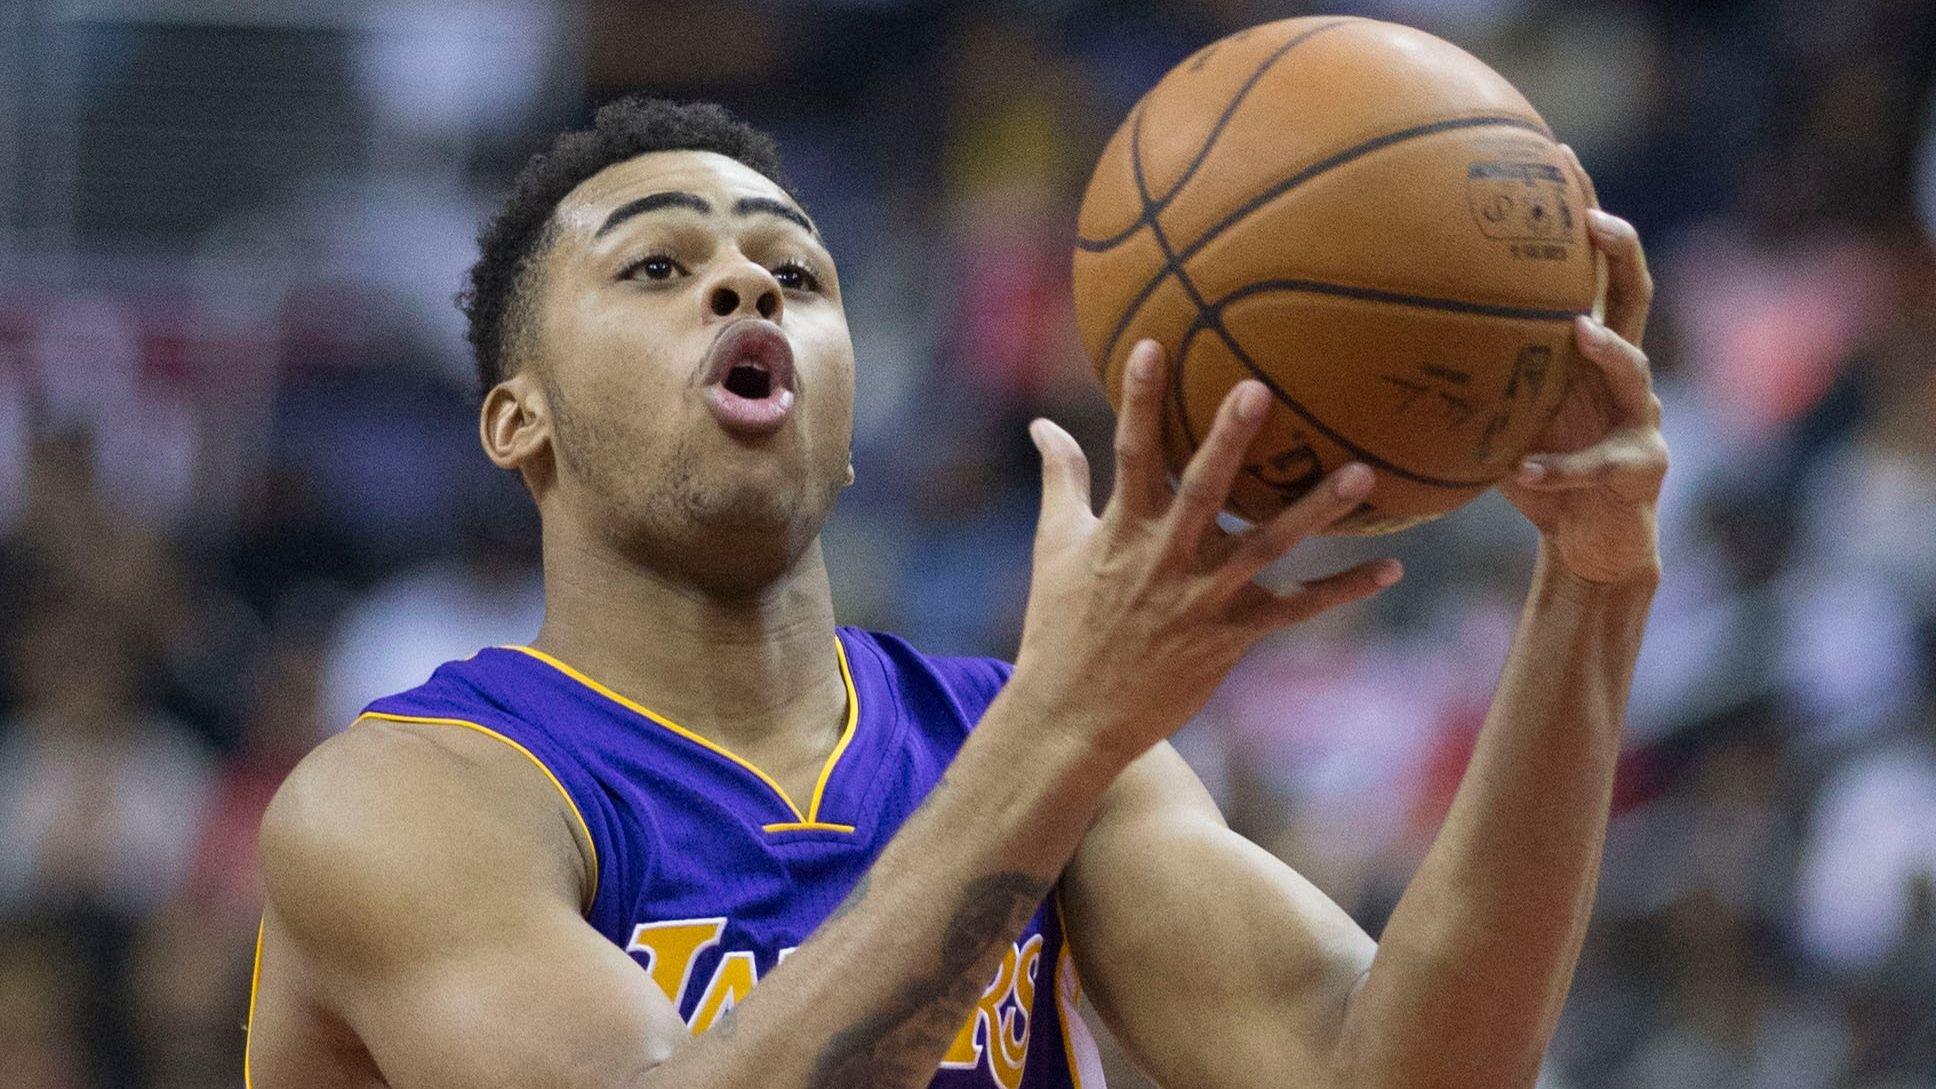 D'Angelo Russell lays up the ball